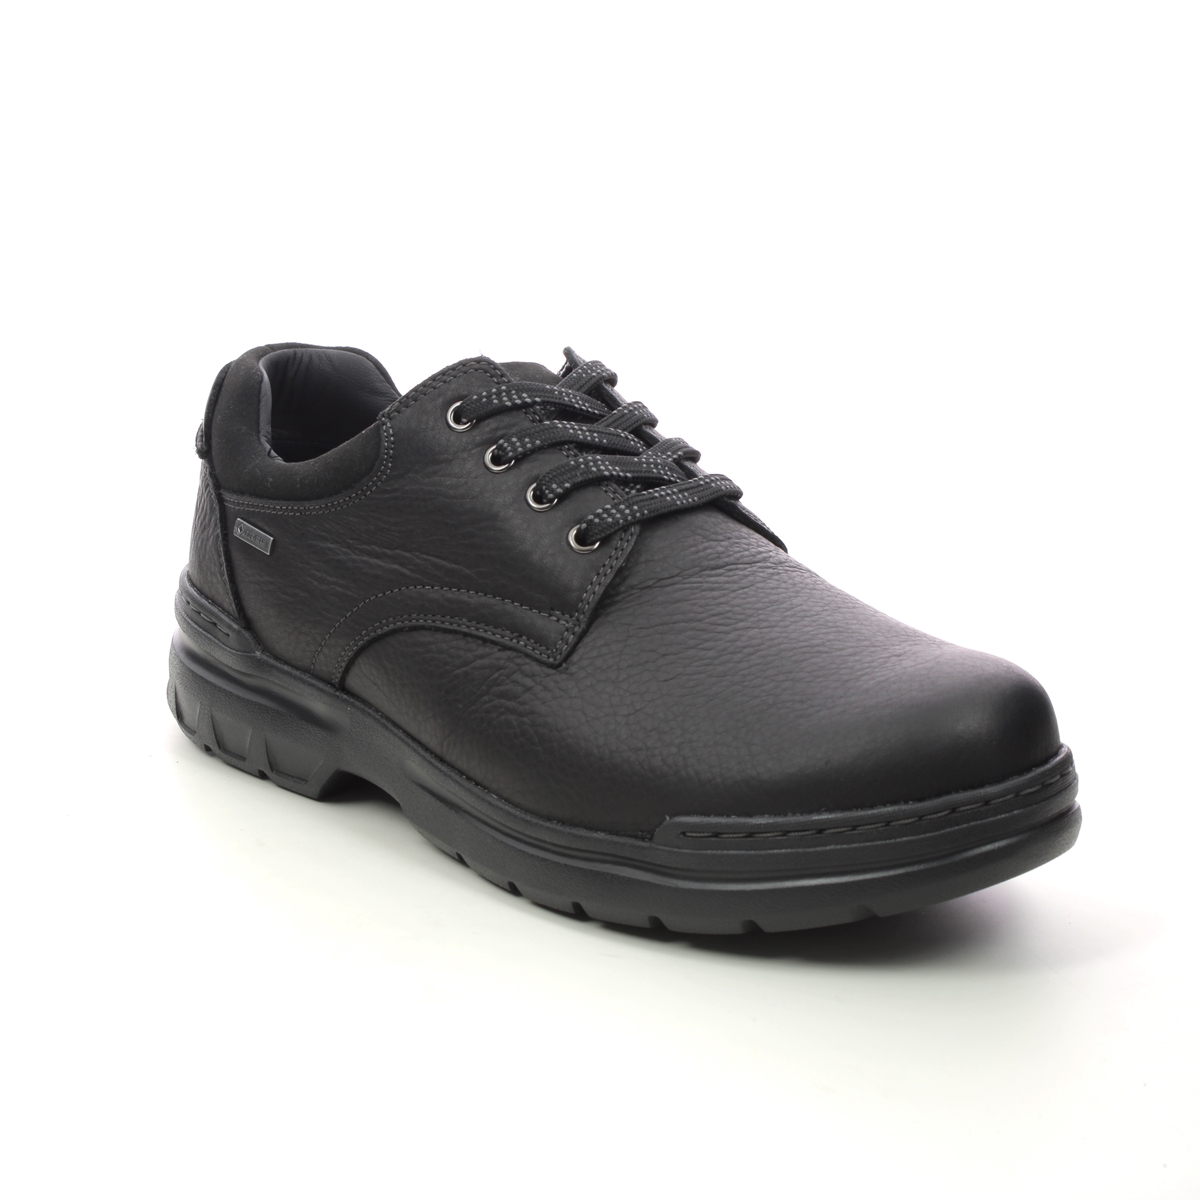 Clarks Rockie Walk Gtx Black Leather Mens Comfort Shoes 734648H In Size 13 In Plain Black Leather H Width Fitting Extra Wide